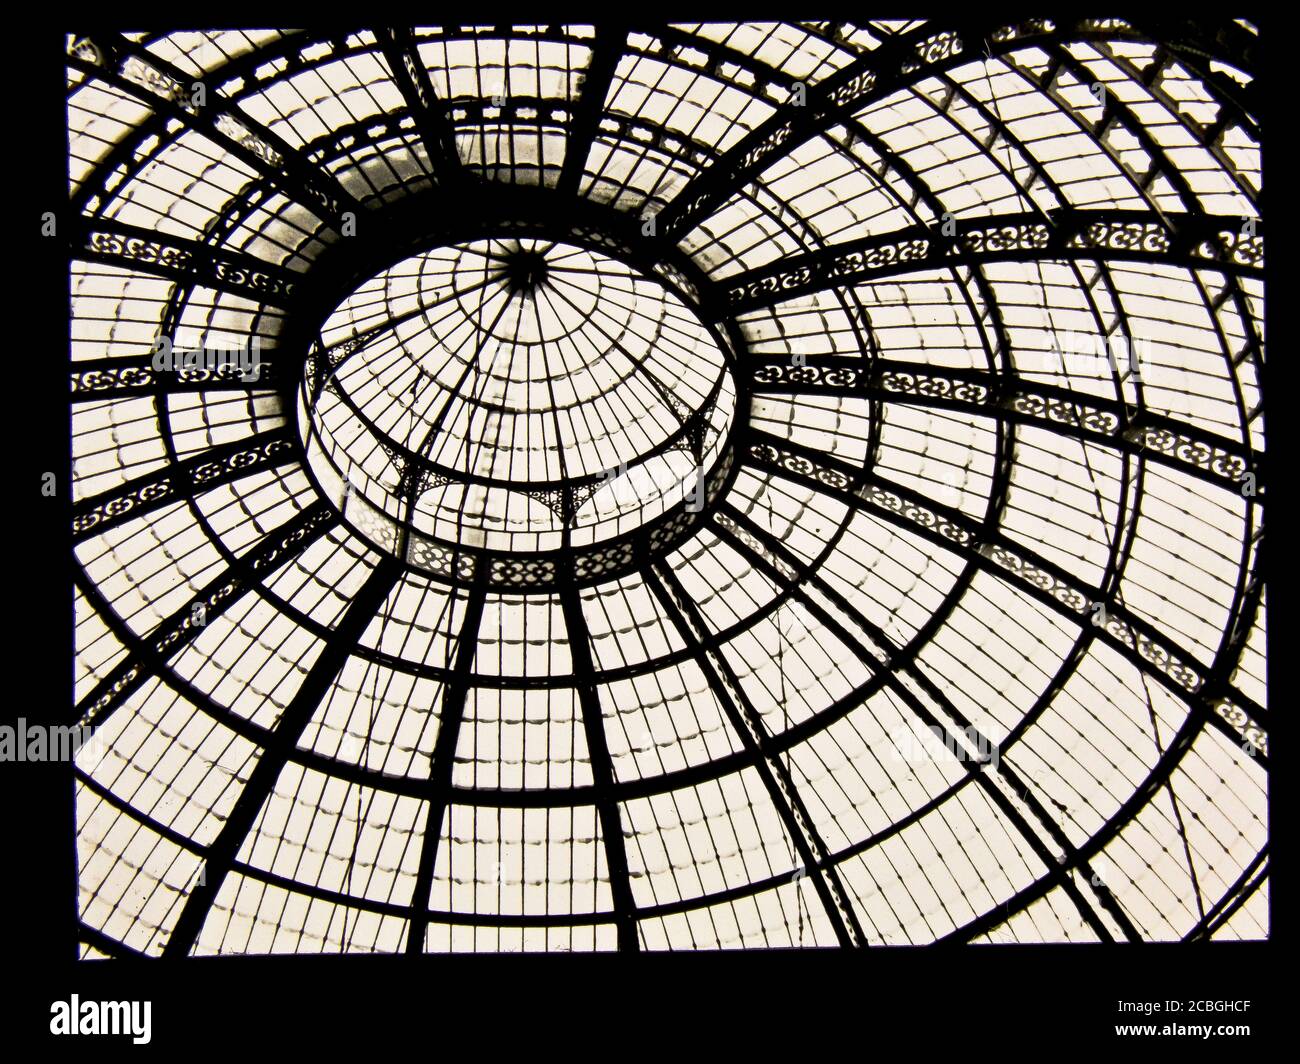 Dome Ceiling Stock Photo